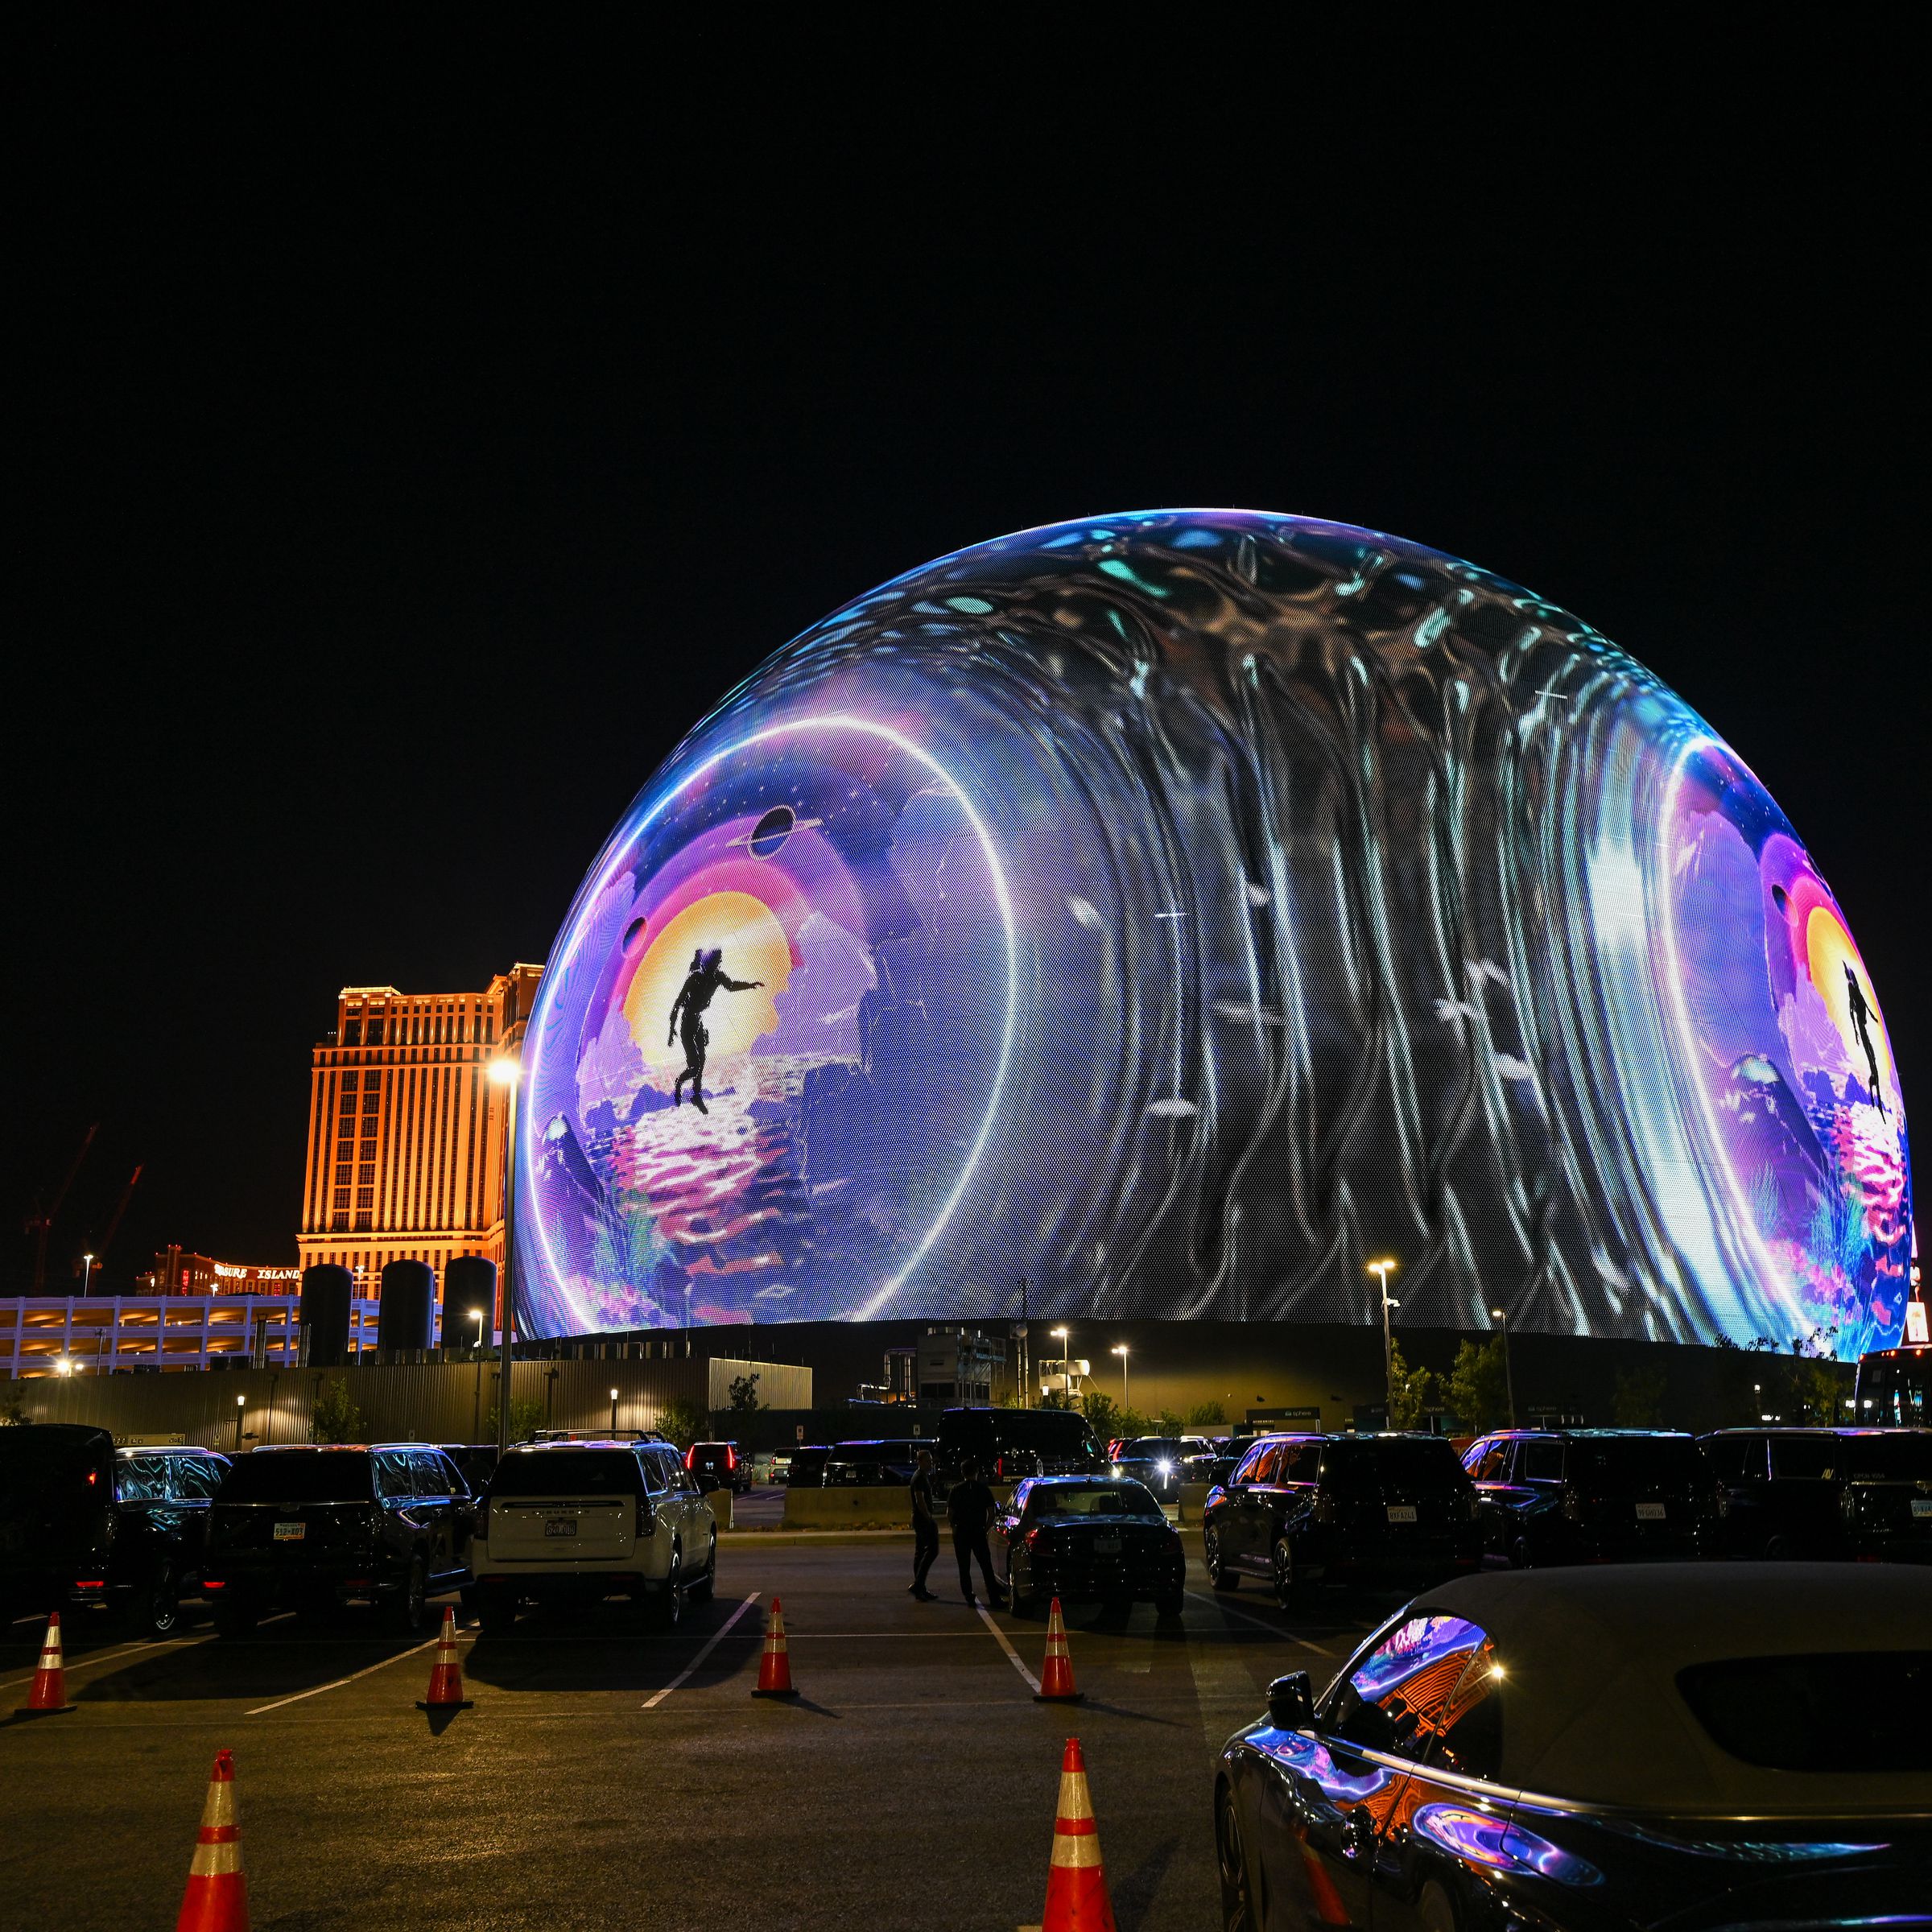 An image of the outside of The Sphere during U2’s performance.